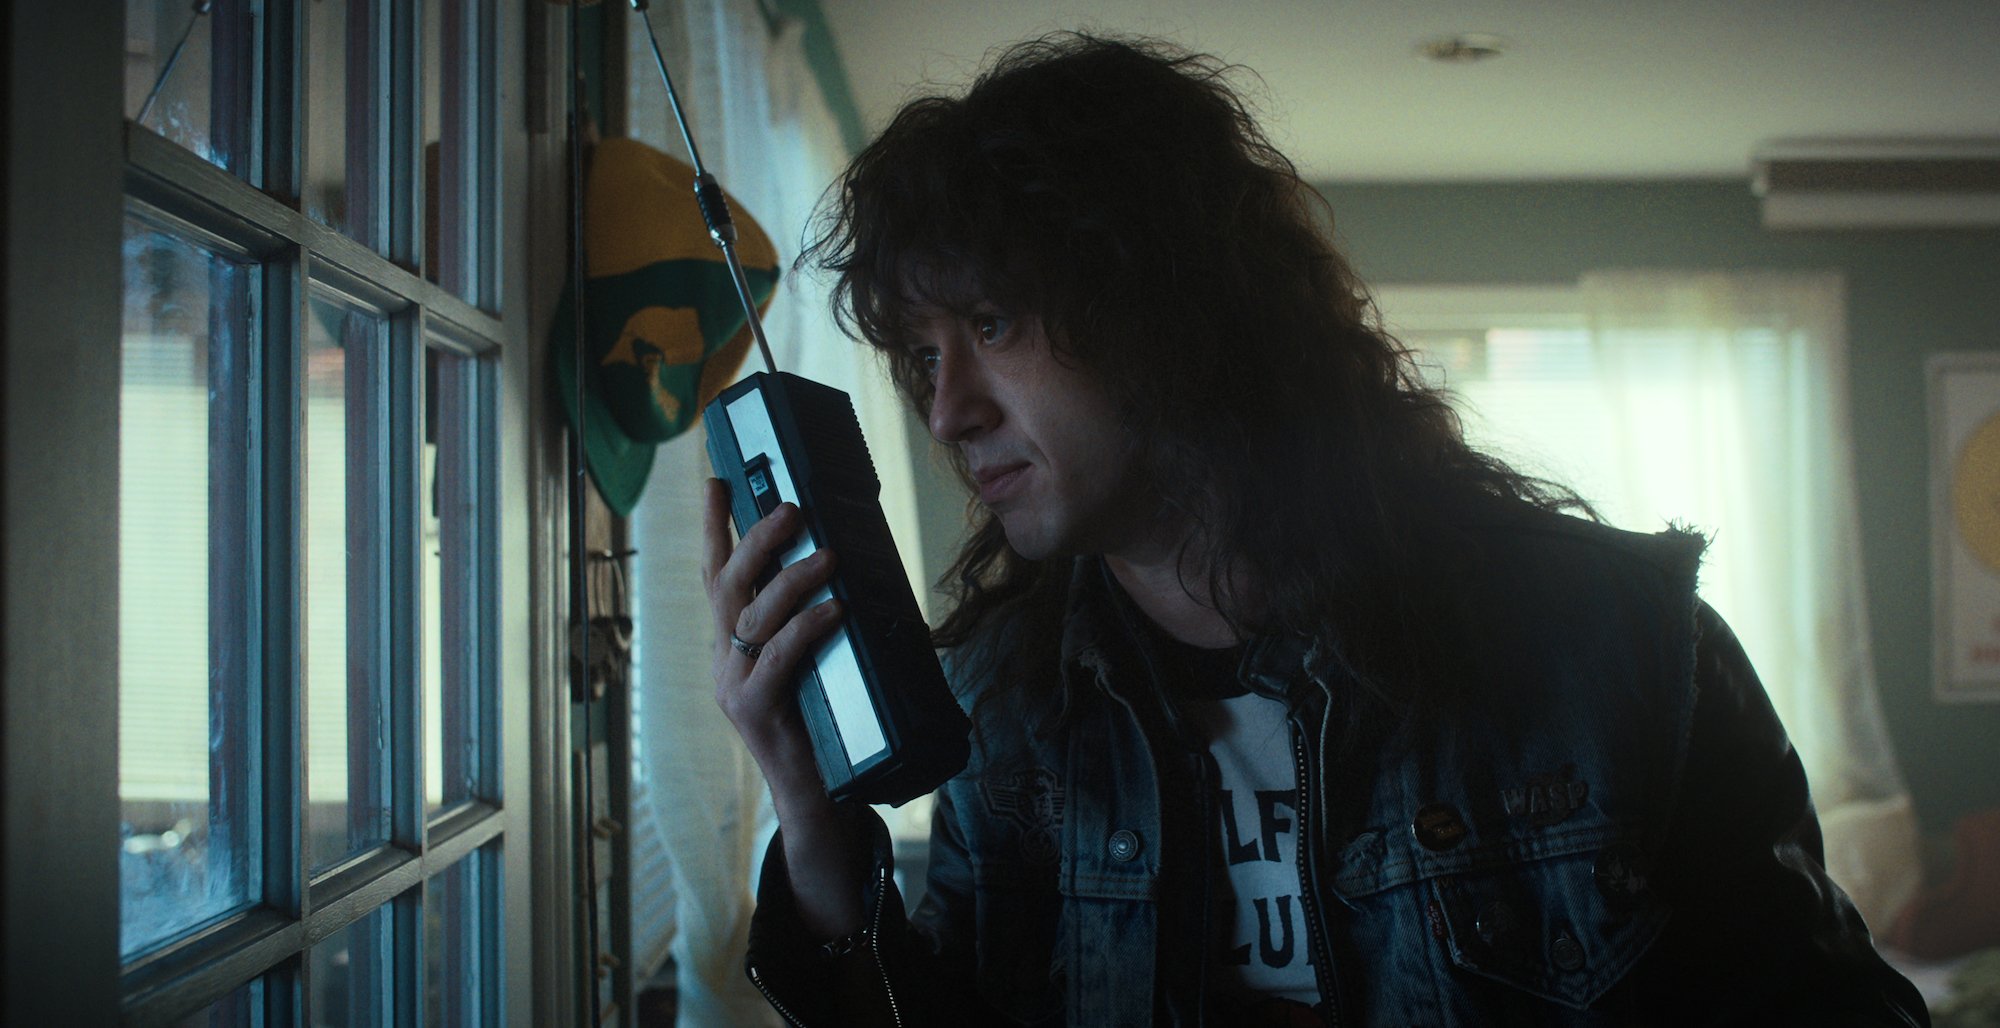 'Stranger Things 4' Episode 'The Dive' features Eddie, played by Joseph Quinn seen here holding a walkie talkie, asking Dustin and the rest of the group for help.